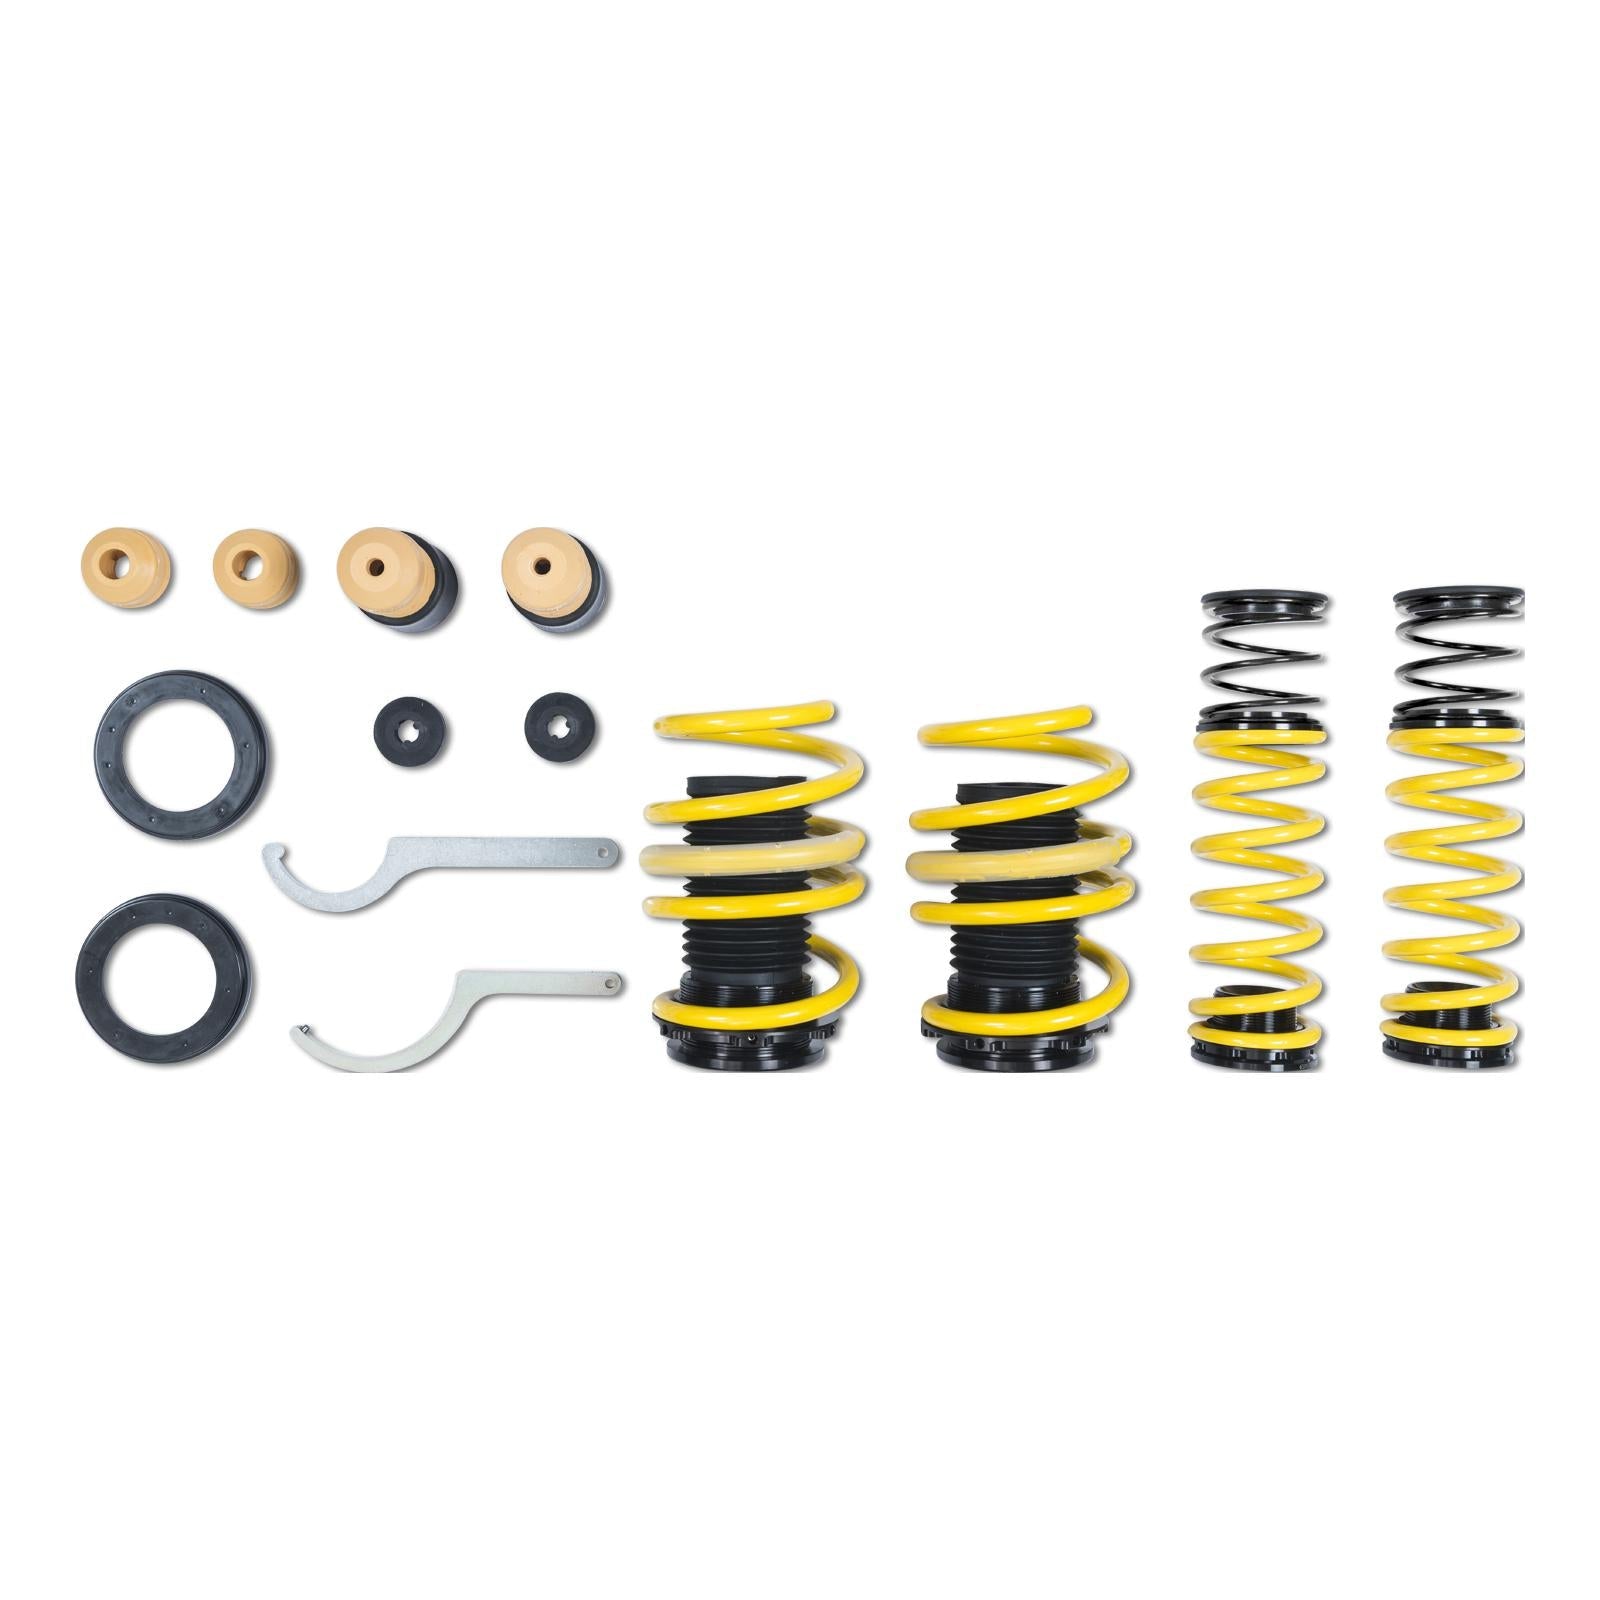 ST Suspensions Adjustable Lowering Springs - Audi B9 A4/S4 Sedan AWD, B9 A5/S5 Coupe AWD With EDC System